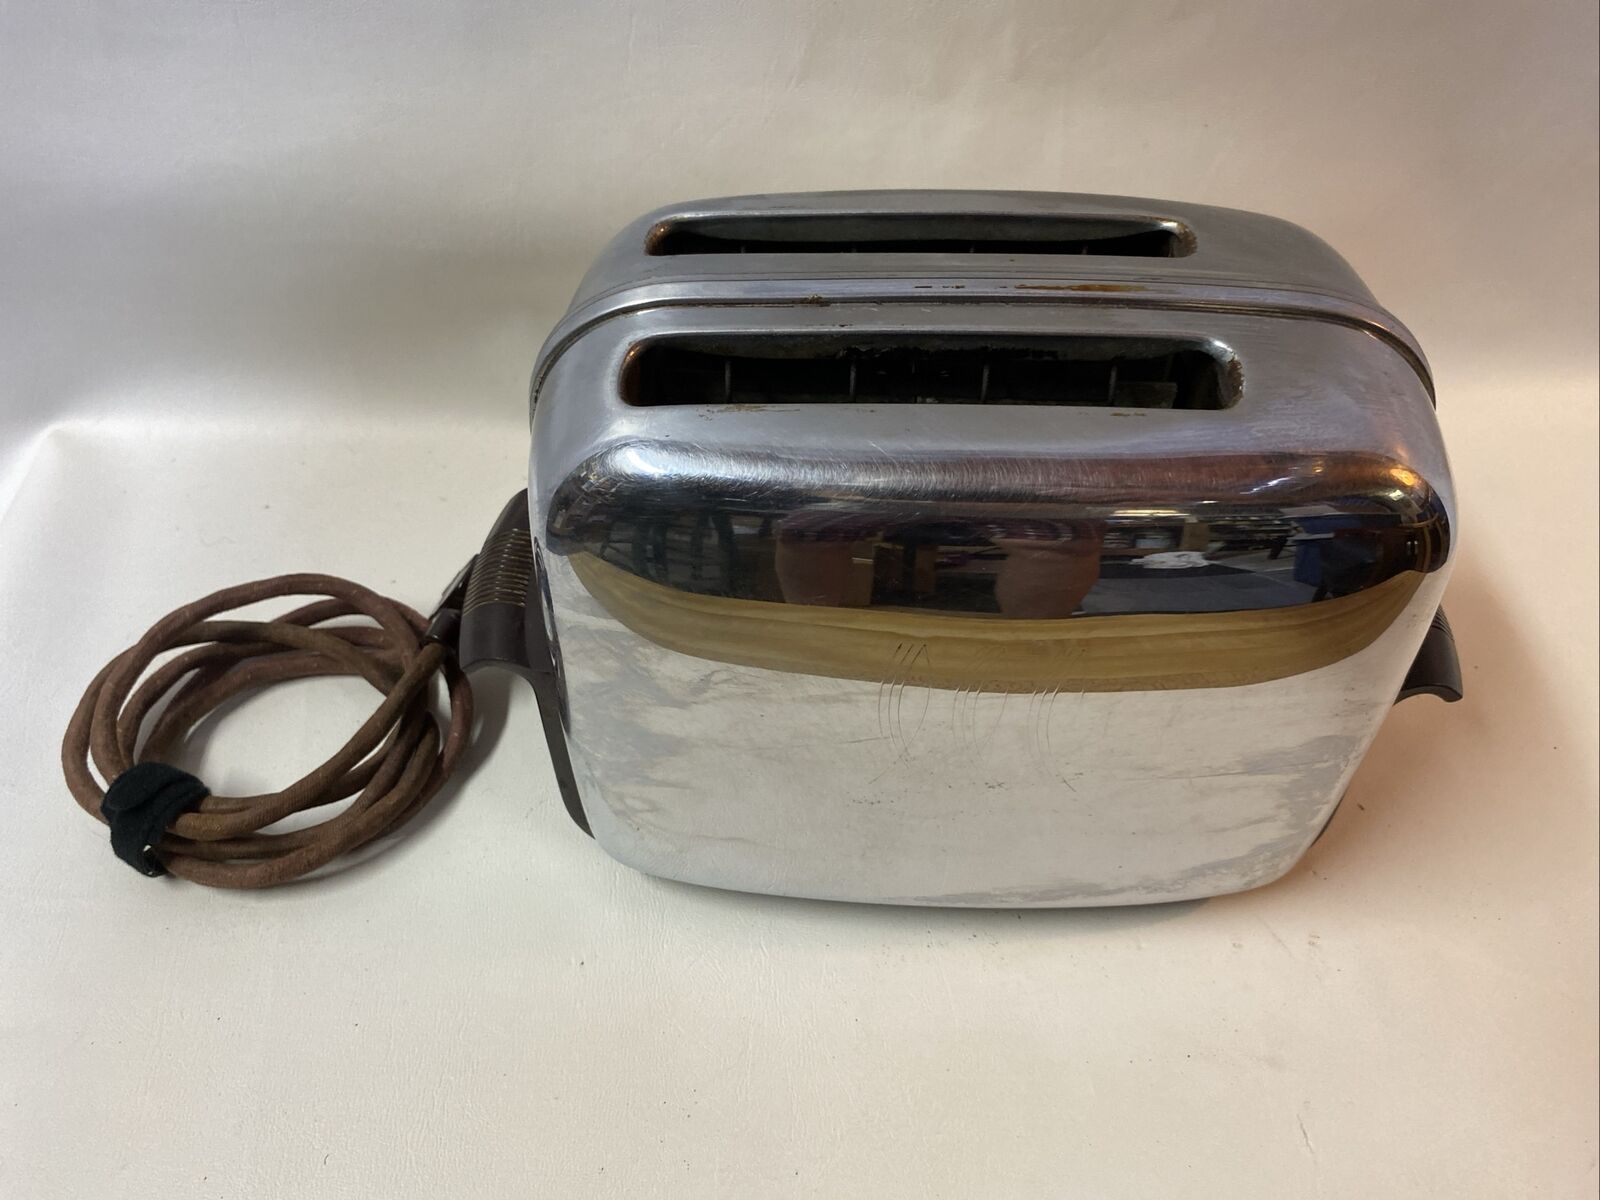 Vintage 1950s TOASTMASTER Automatic Pop Up Toaster 1B14 Chrome Art Deco Works